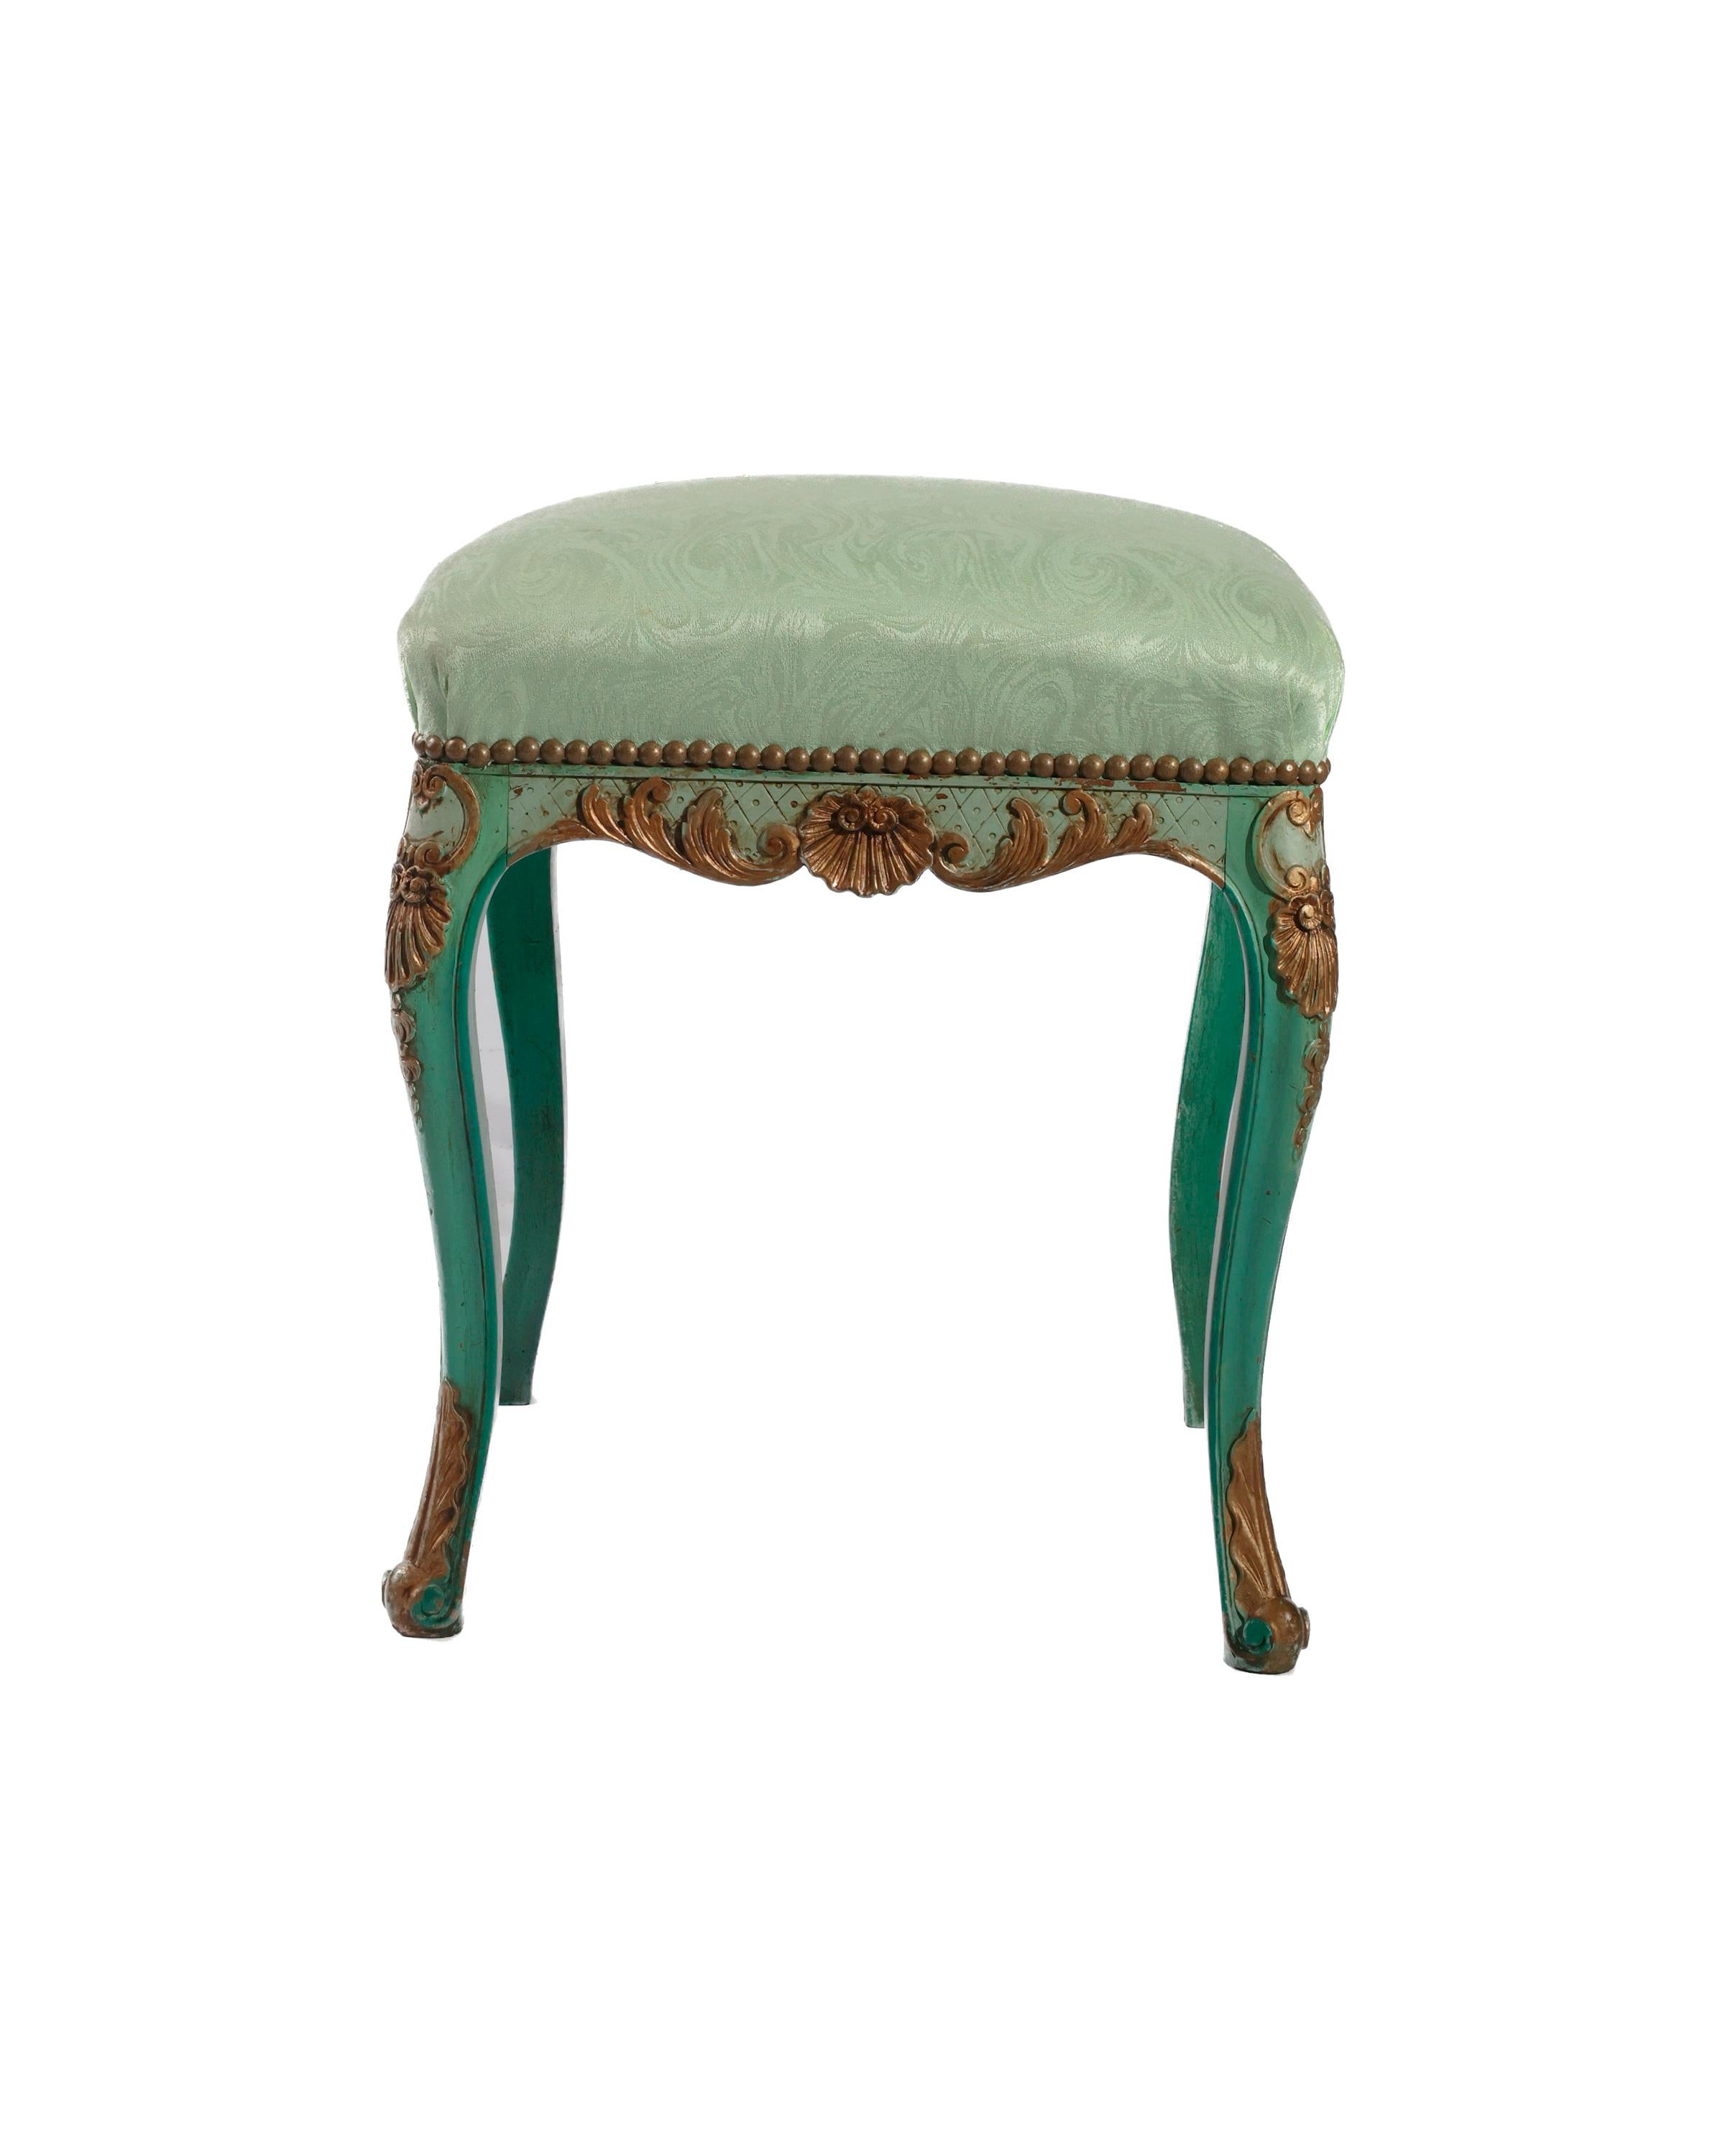 French antique stool in a beautiful green enamel with fine gilt details. The stool is upholstered in a green silk damask. Purchased in Lyon, France, This uniquely elegant stool would be a lovely addition to a dressing room, powder room vanity, or